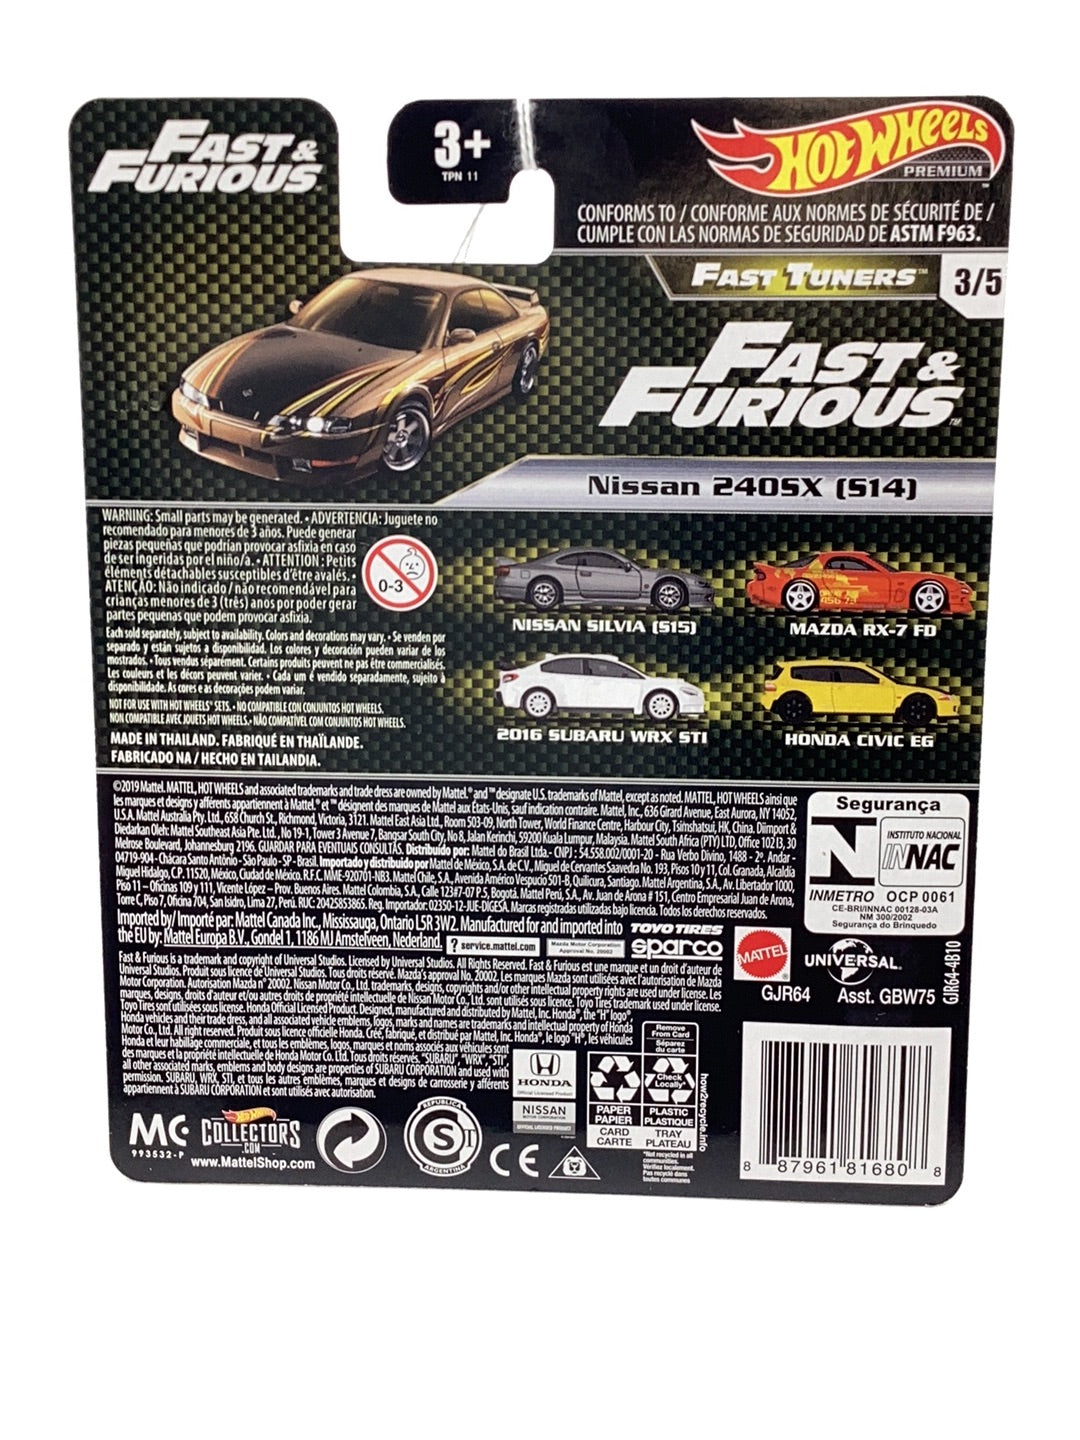 Hot Wheels premium fast and furious Fast Tuners #3 Nissan 240SX S14 246K